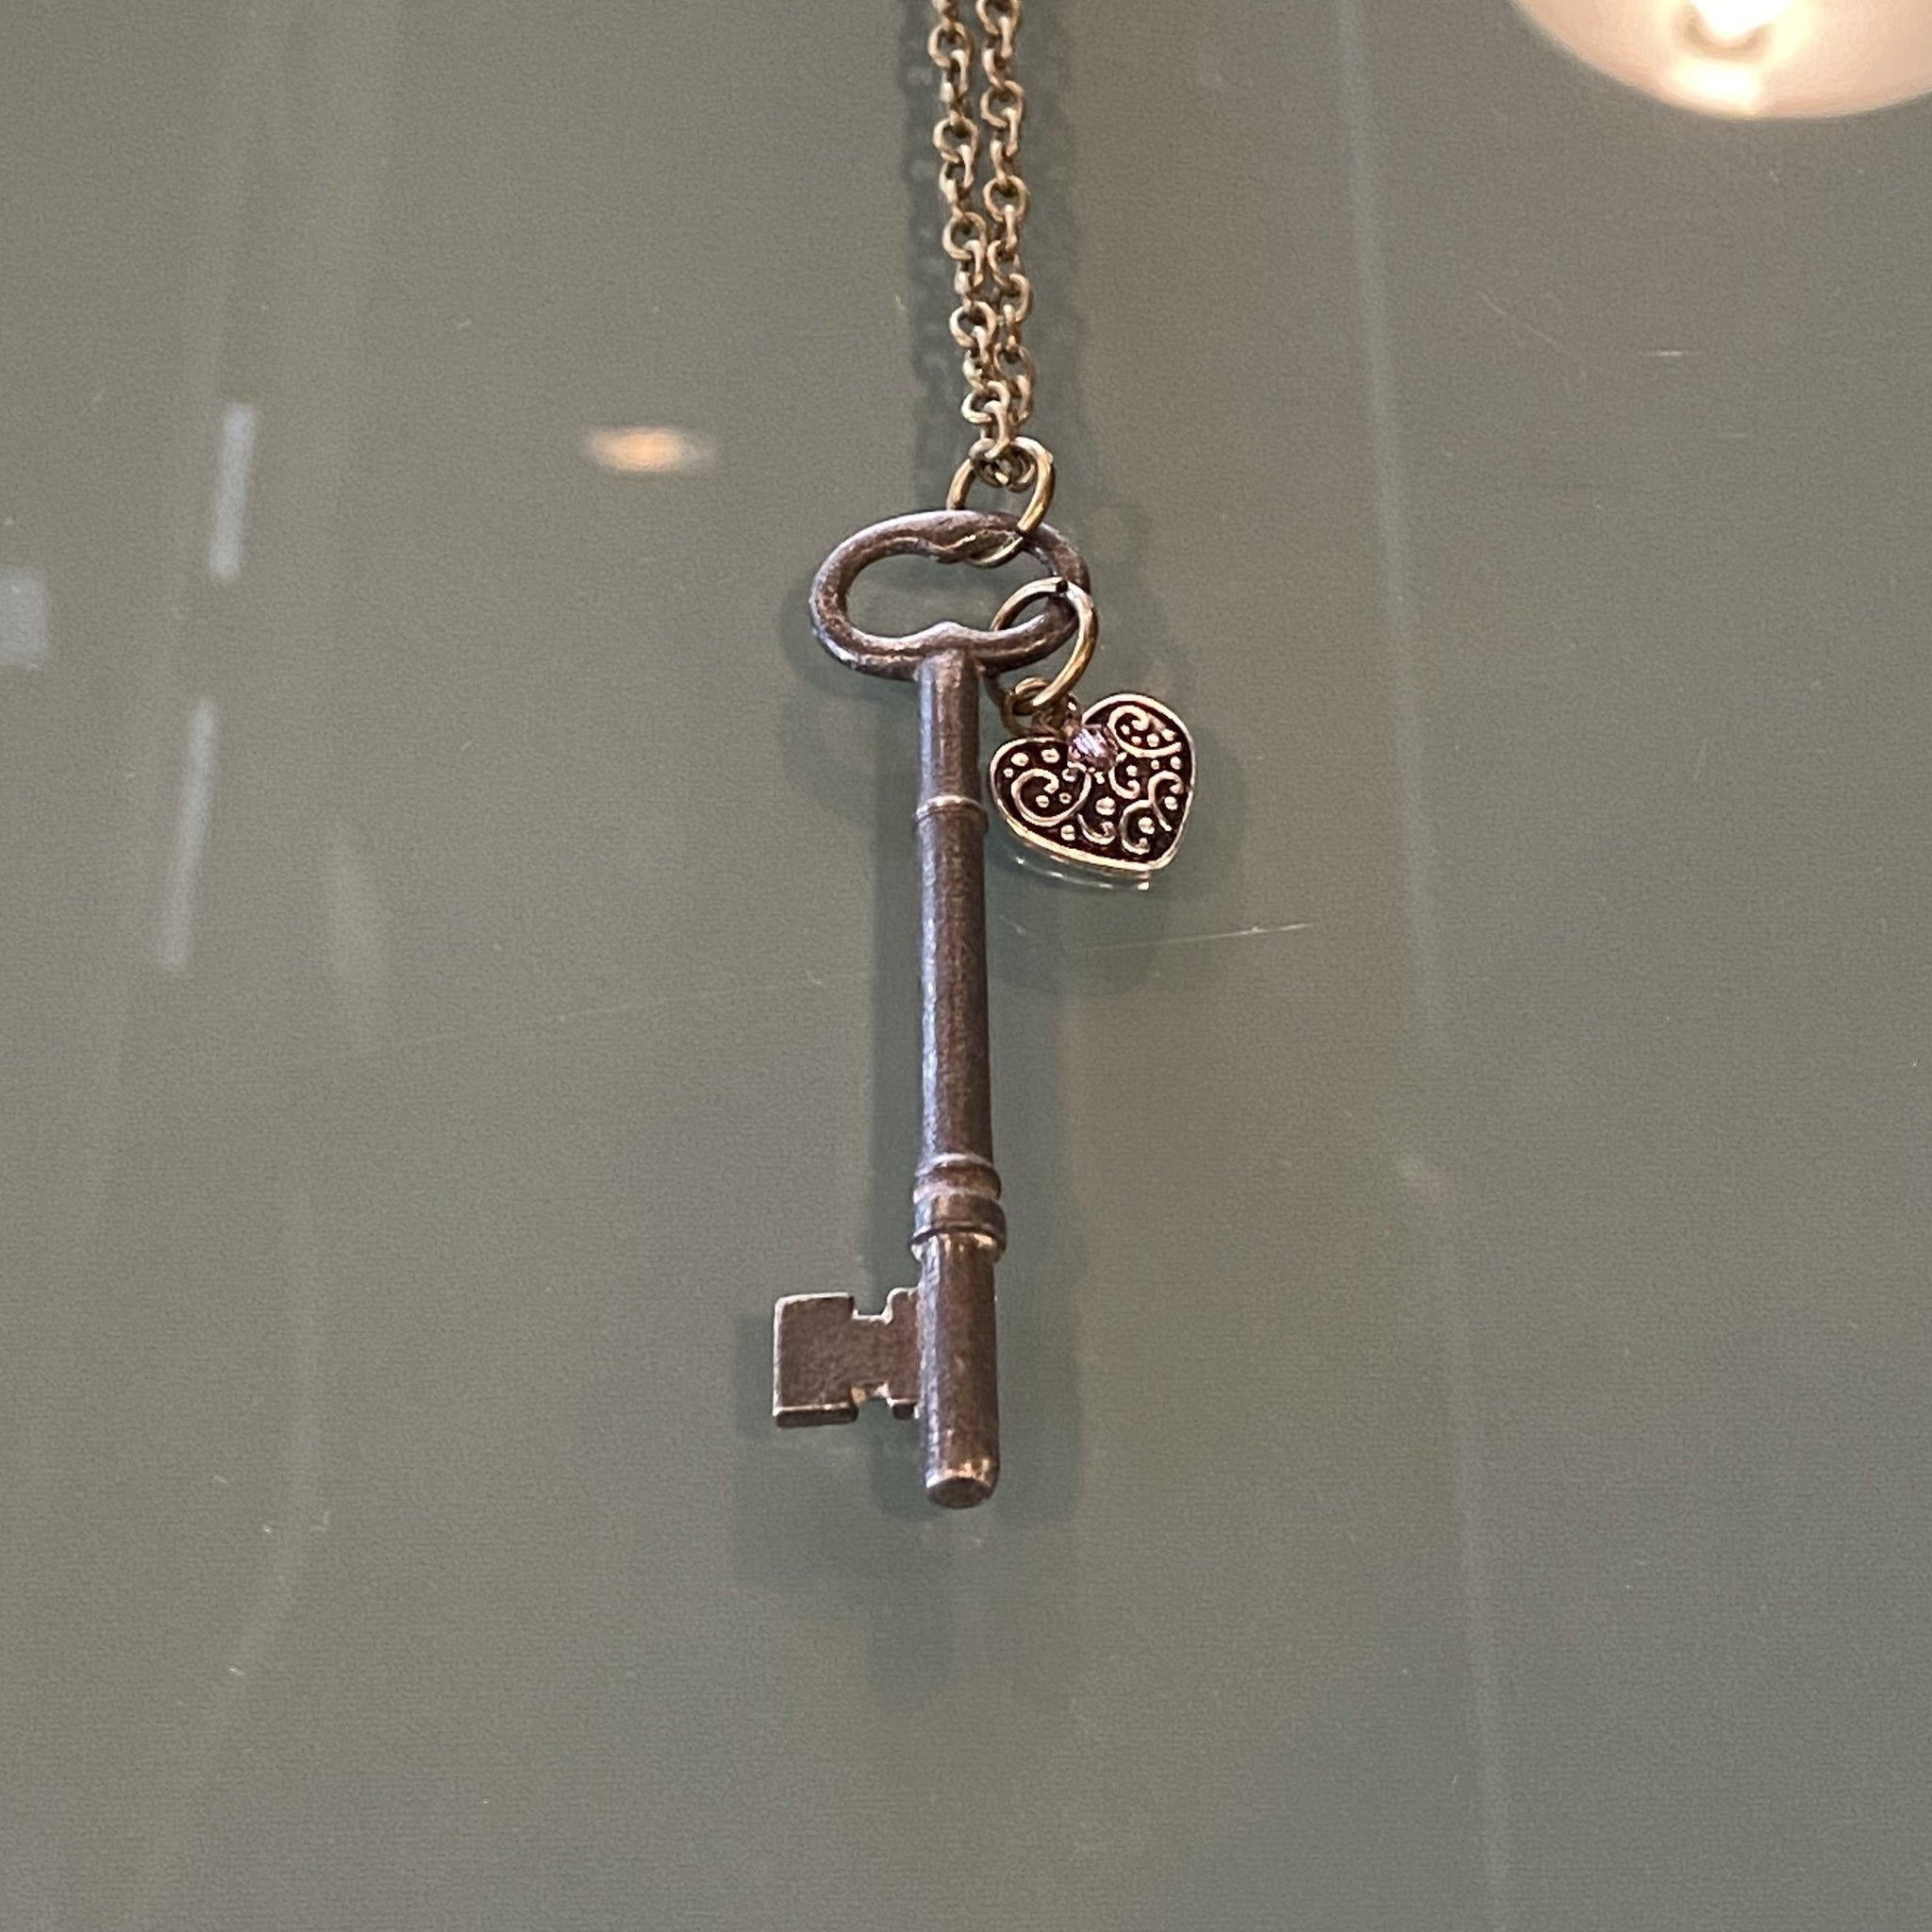 Vintage Skeleton Key and Heart Charm Necklace